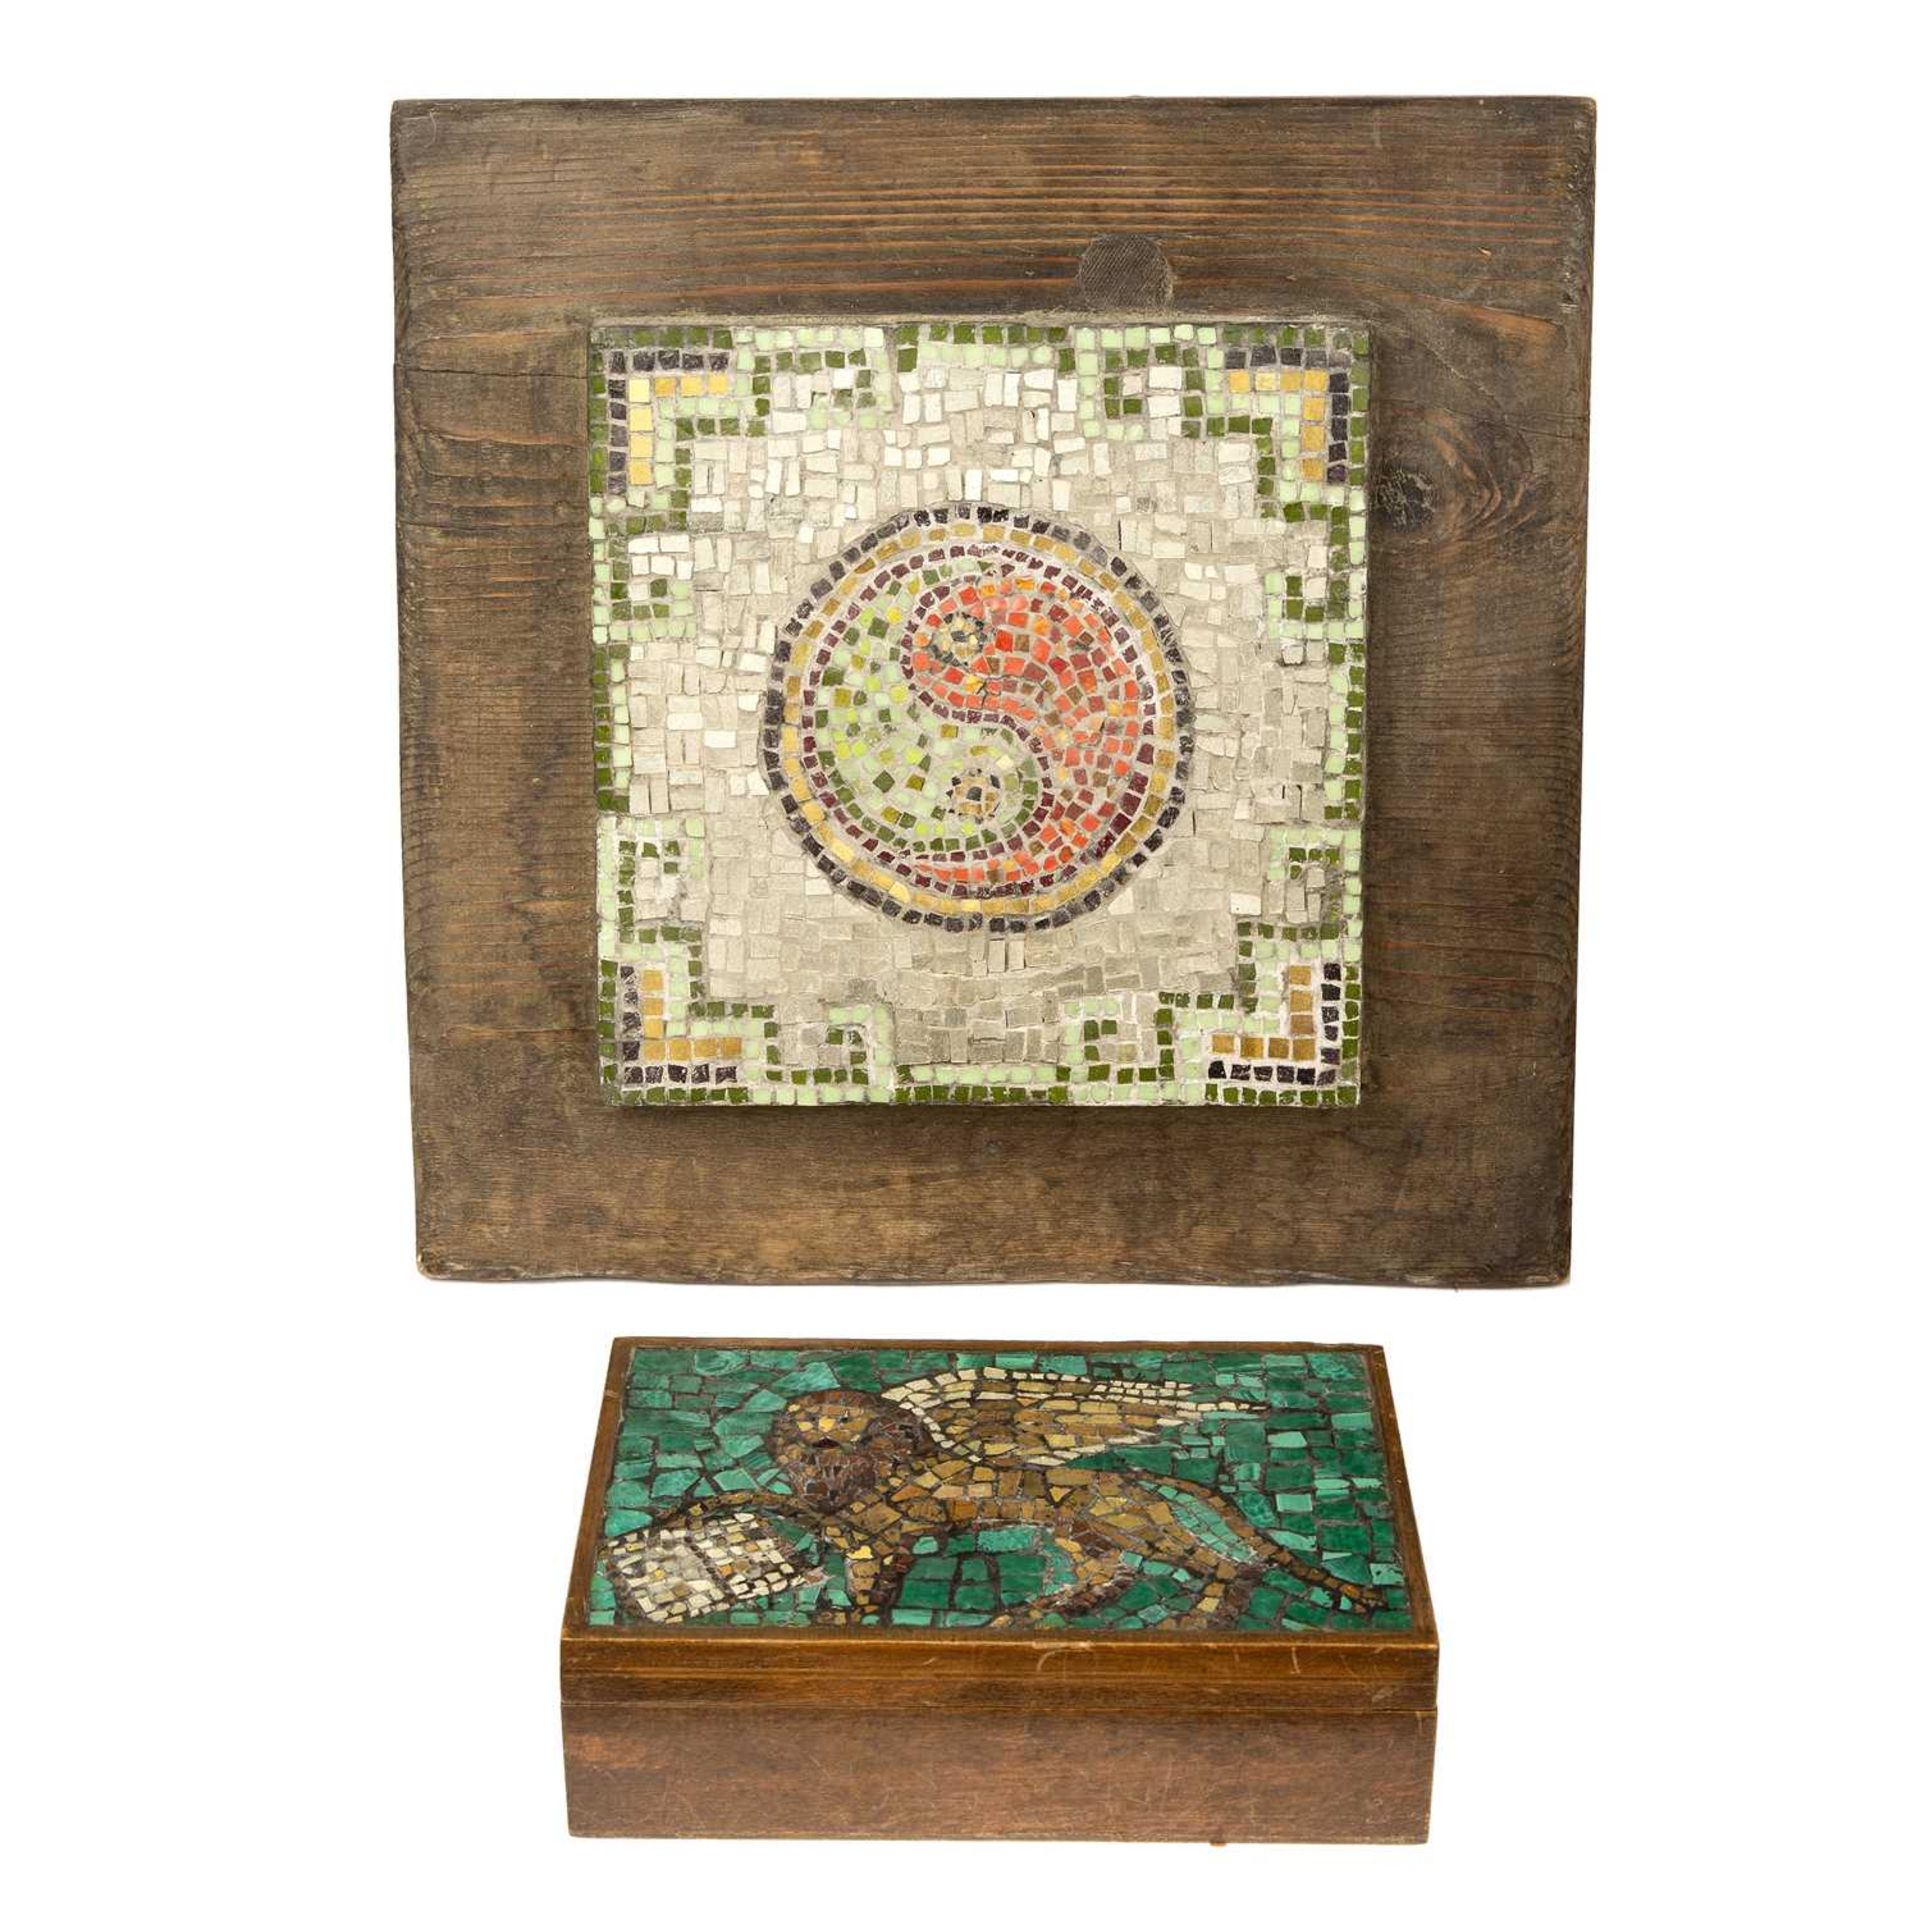 Vestey Entwistle 1970s wooden box inset polychrome mosaic panel decorated with the Lion of Venice